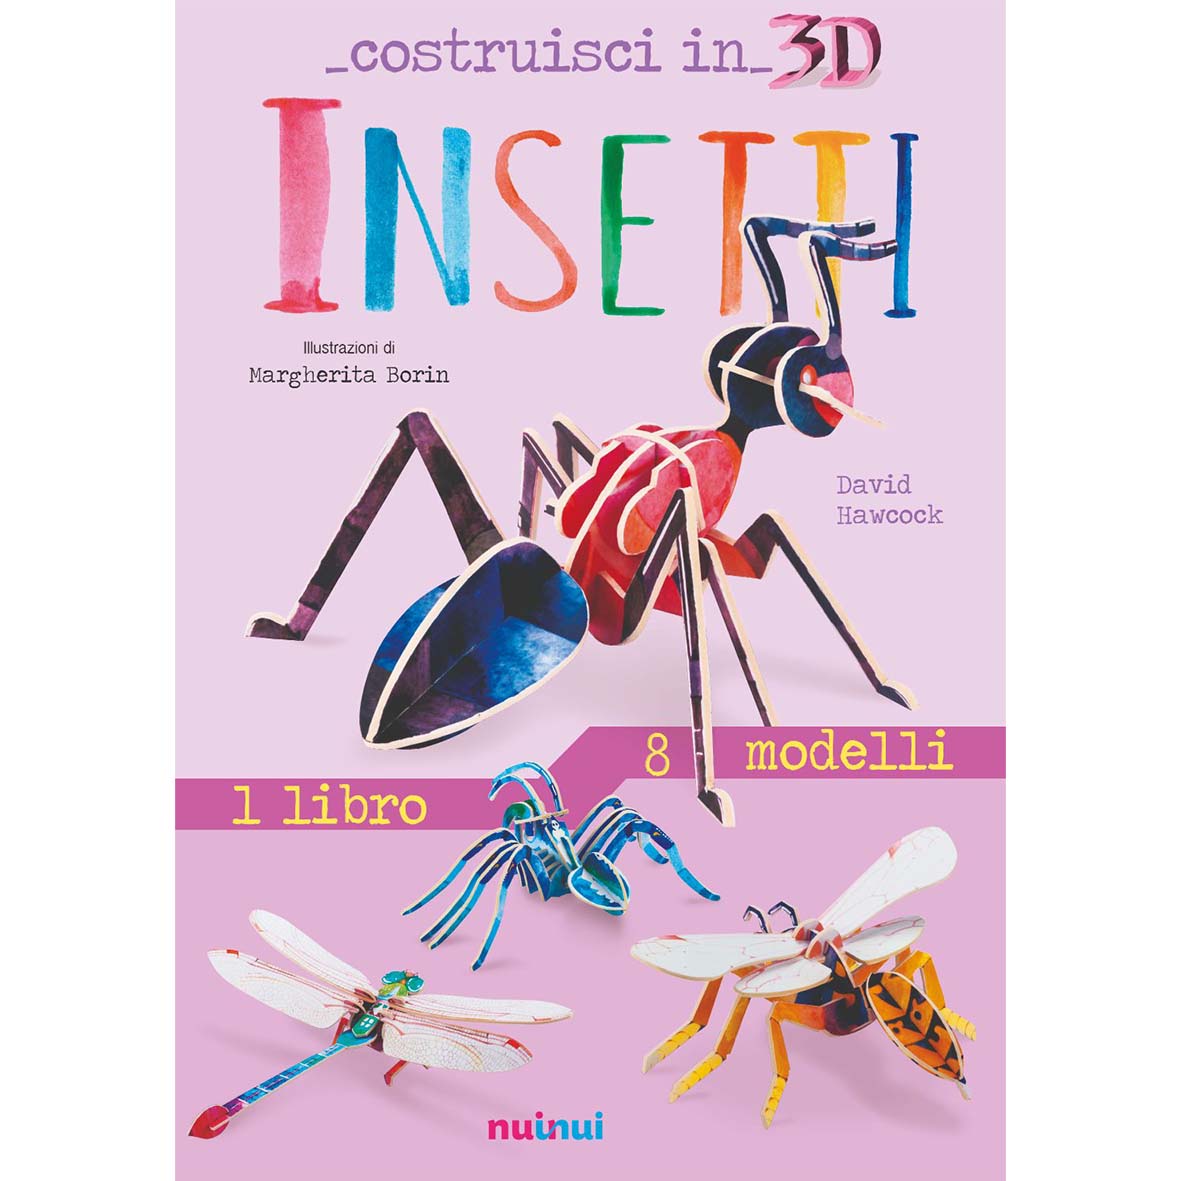 Build in 3D - Insects